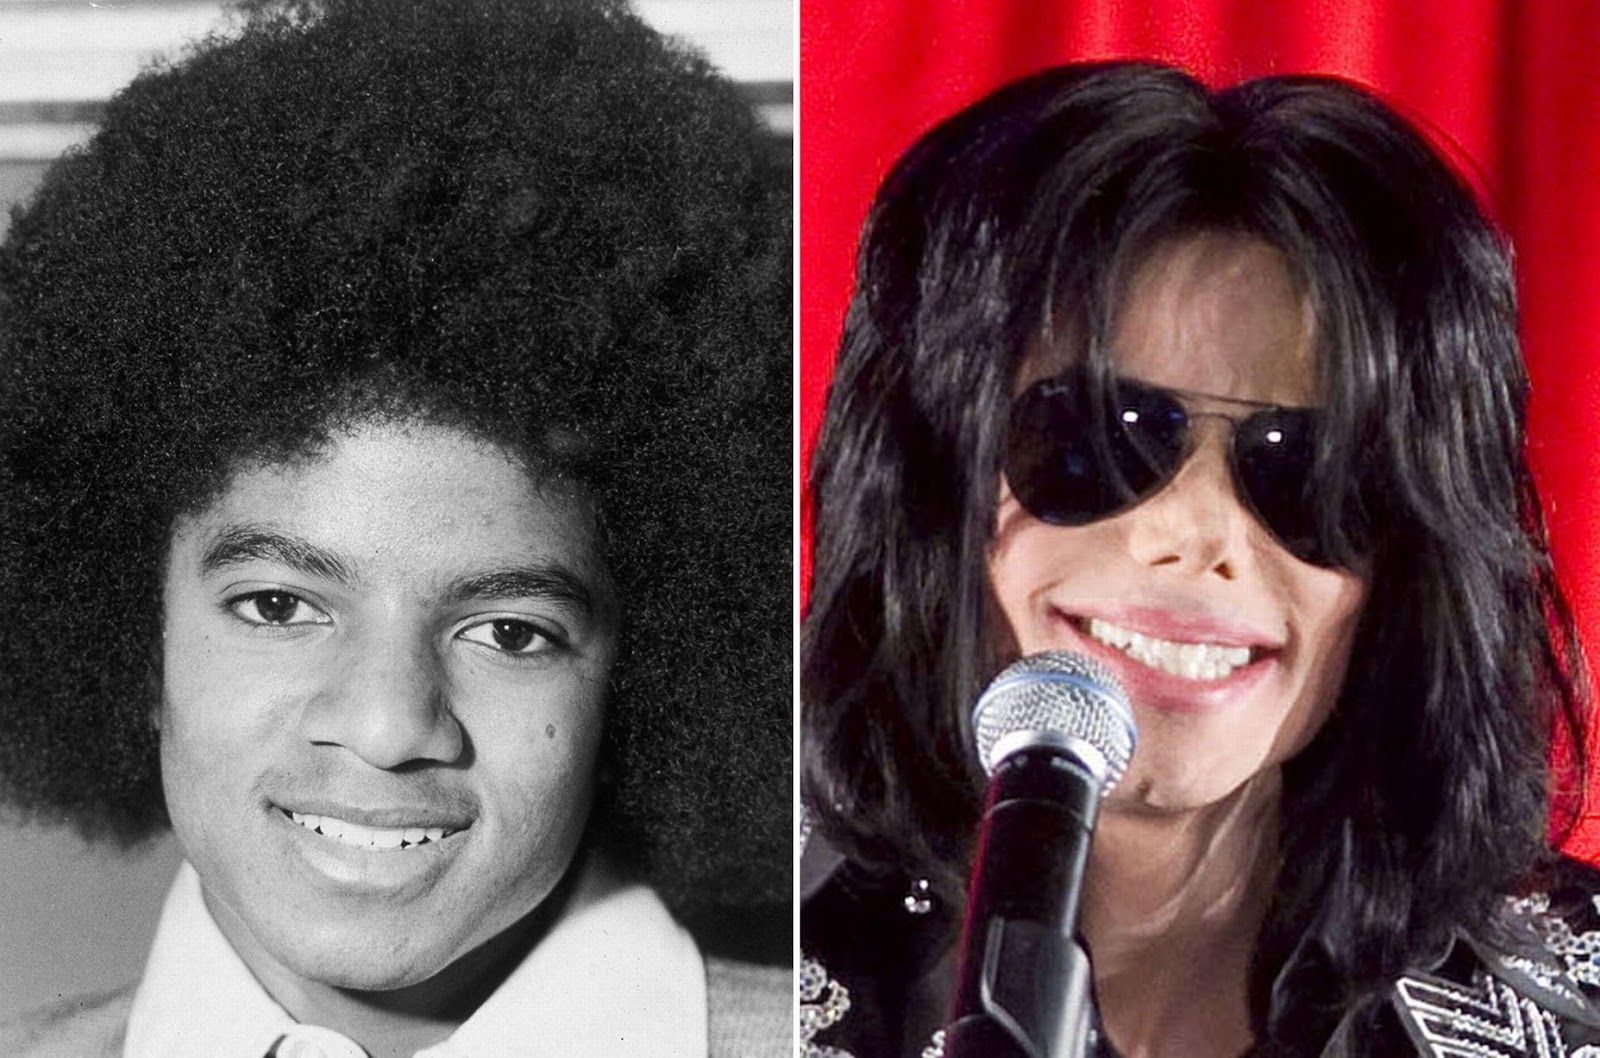 Michael-Jackson-before-and-after-nose-surgery.jpg